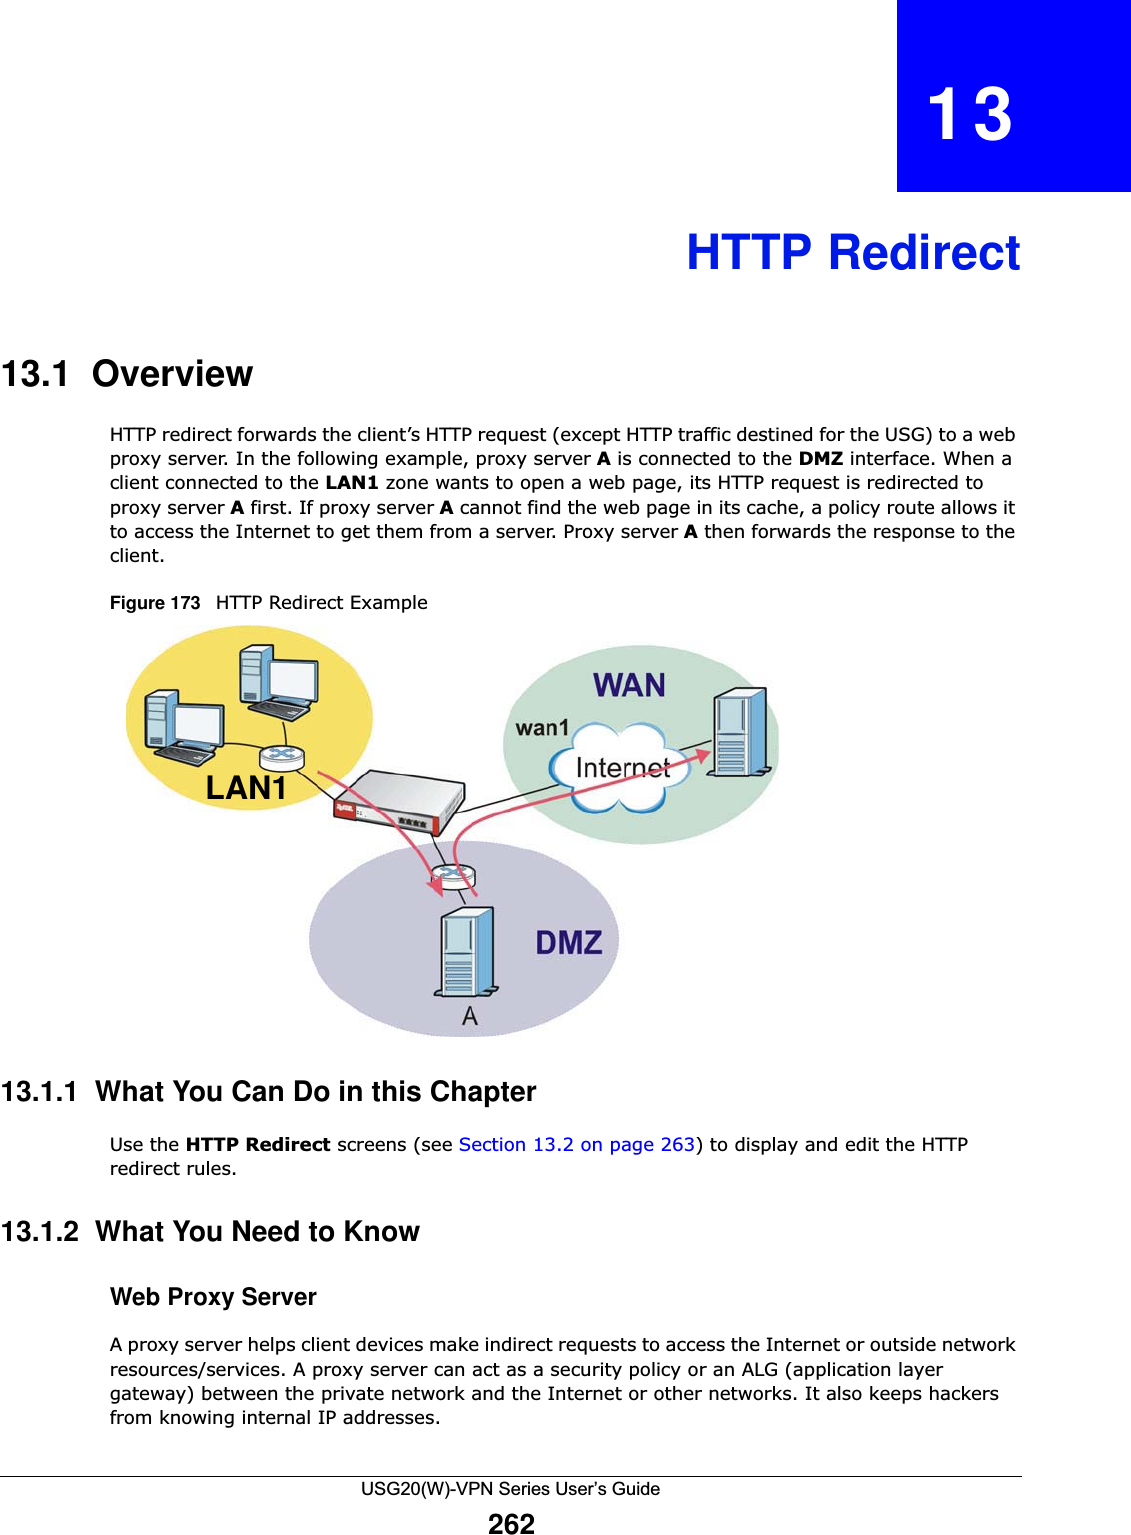 USG20(W)-VPN Series User’s Guide262CHAPTER   13HTTP Redirect13.1  OverviewHTTP redirect forwards the client’s HTTP request (except HTTP traffic destined for the USG) to a web proxy server. In the following example, proxy server A is connected to the DMZ interface. When a client connected to the LAN1 zone wants to open a web page, its HTTP request is redirected to proxy server A first. If proxy server A cannot find the web page in its cache, a policy route allows it to access the Internet to get them from a server. Proxy server A then forwards the response to the client. Figure 173   HTTP Redirect Example    13.1.1  What You Can Do in this ChapterUse the HTTP Redirect screens (see Section 13.2 on page 263) to display and edit the HTTP redirect rules.13.1.2  What You Need to KnowWeb Proxy ServerA proxy server helps client devices make indirect requests to access the Internet or outside network resources/services. A proxy server can act as a security policy or an ALG (application layer gateway) between the private network and the Internet or other networks. It also keeps hackers from knowing internal IP addresses.LAN1